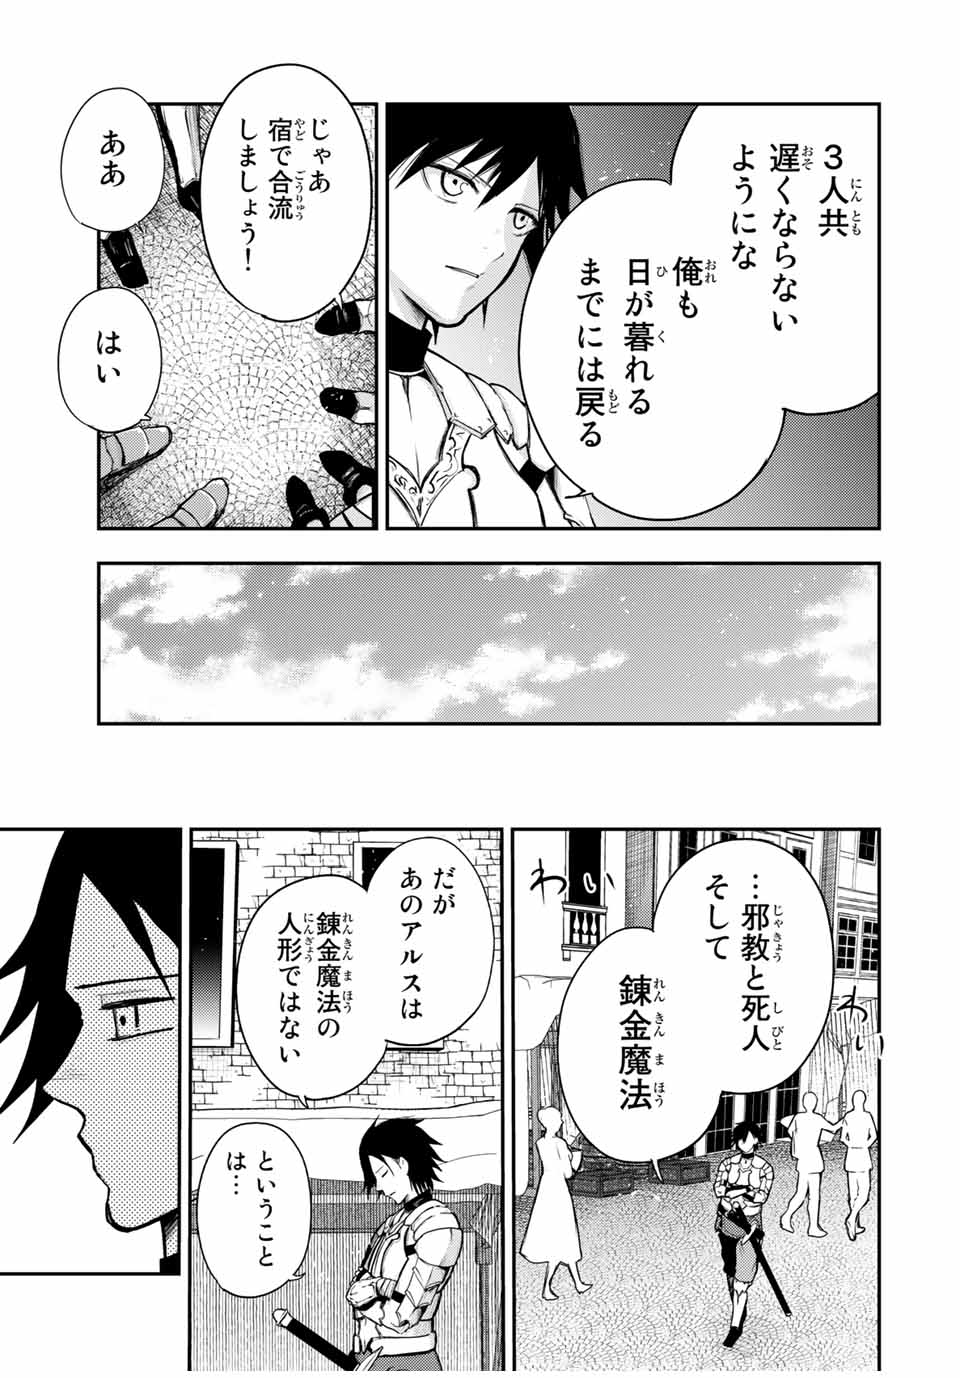 the strongest former prince-; 奴隷転生 ～その奴隷、最強の元王子につき～ 第32話 - Page 13